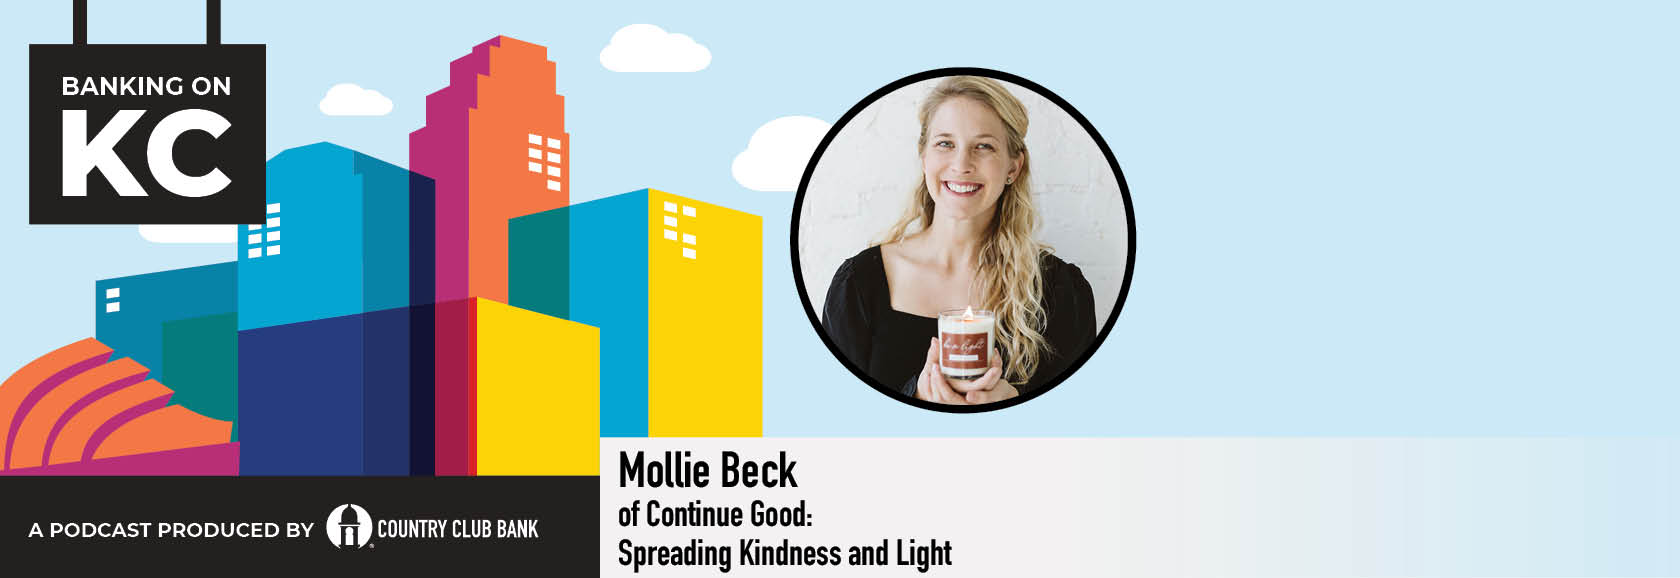 Banking on KC – Mollie Beck of Continue Good